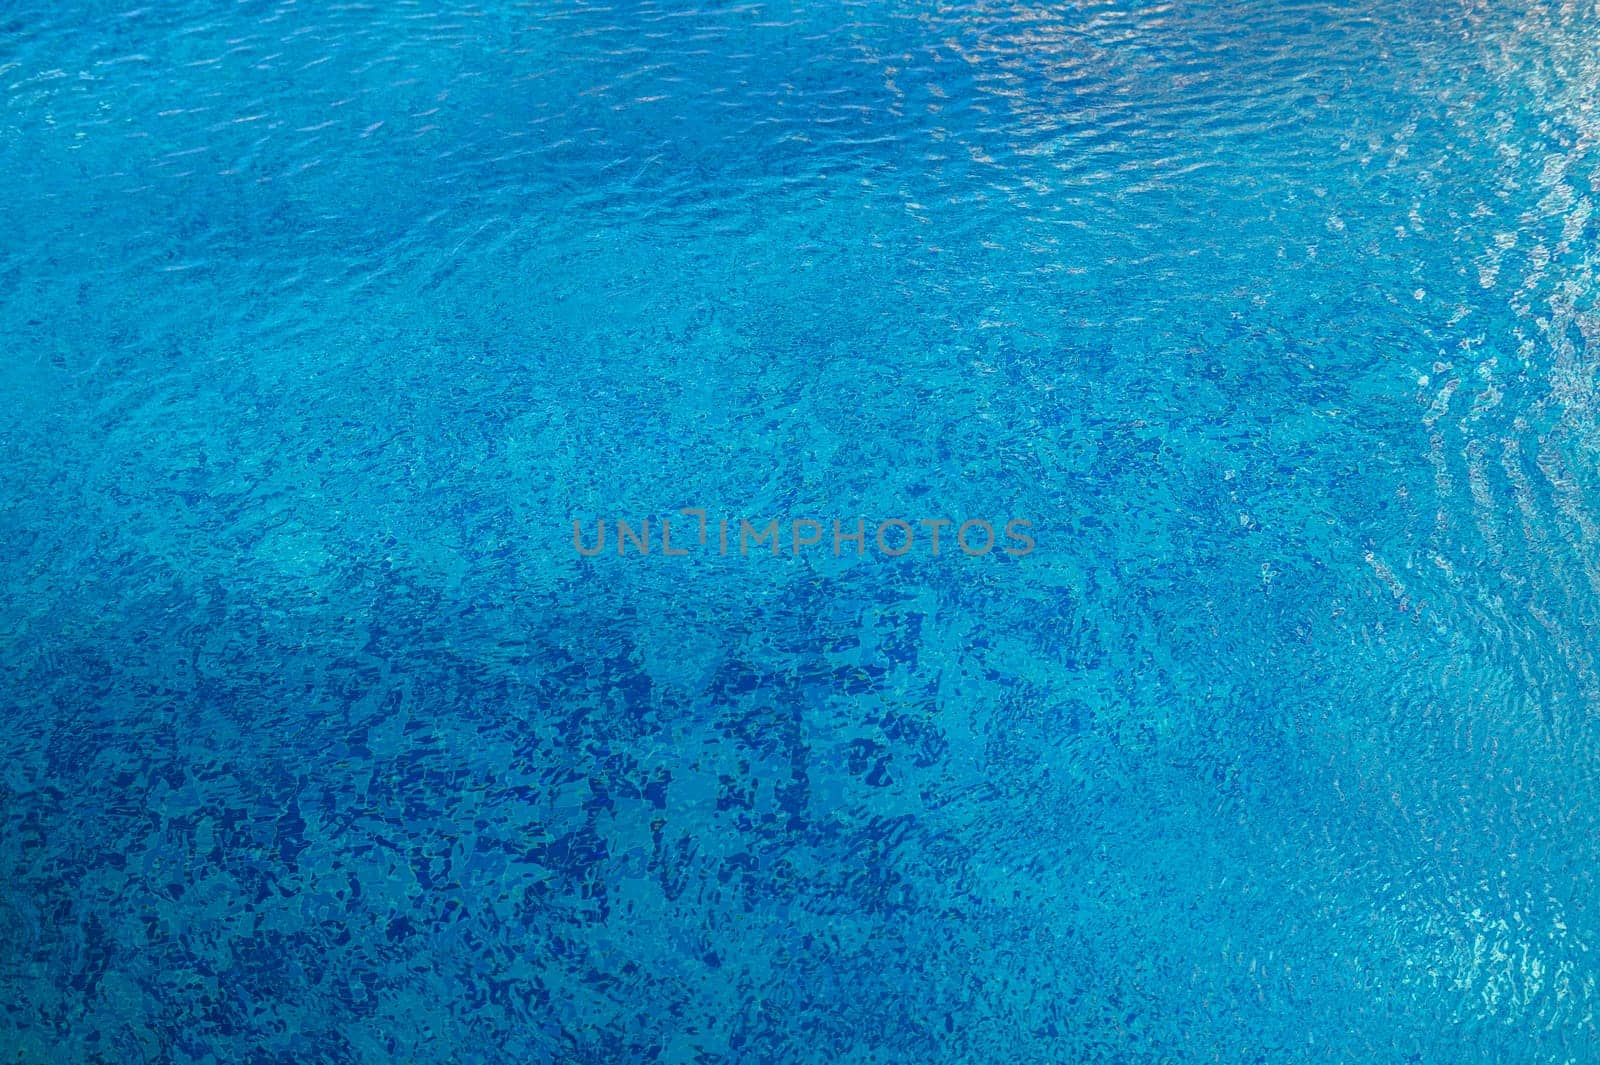 Blue ripped water in swimming pool 1 by Mixa74